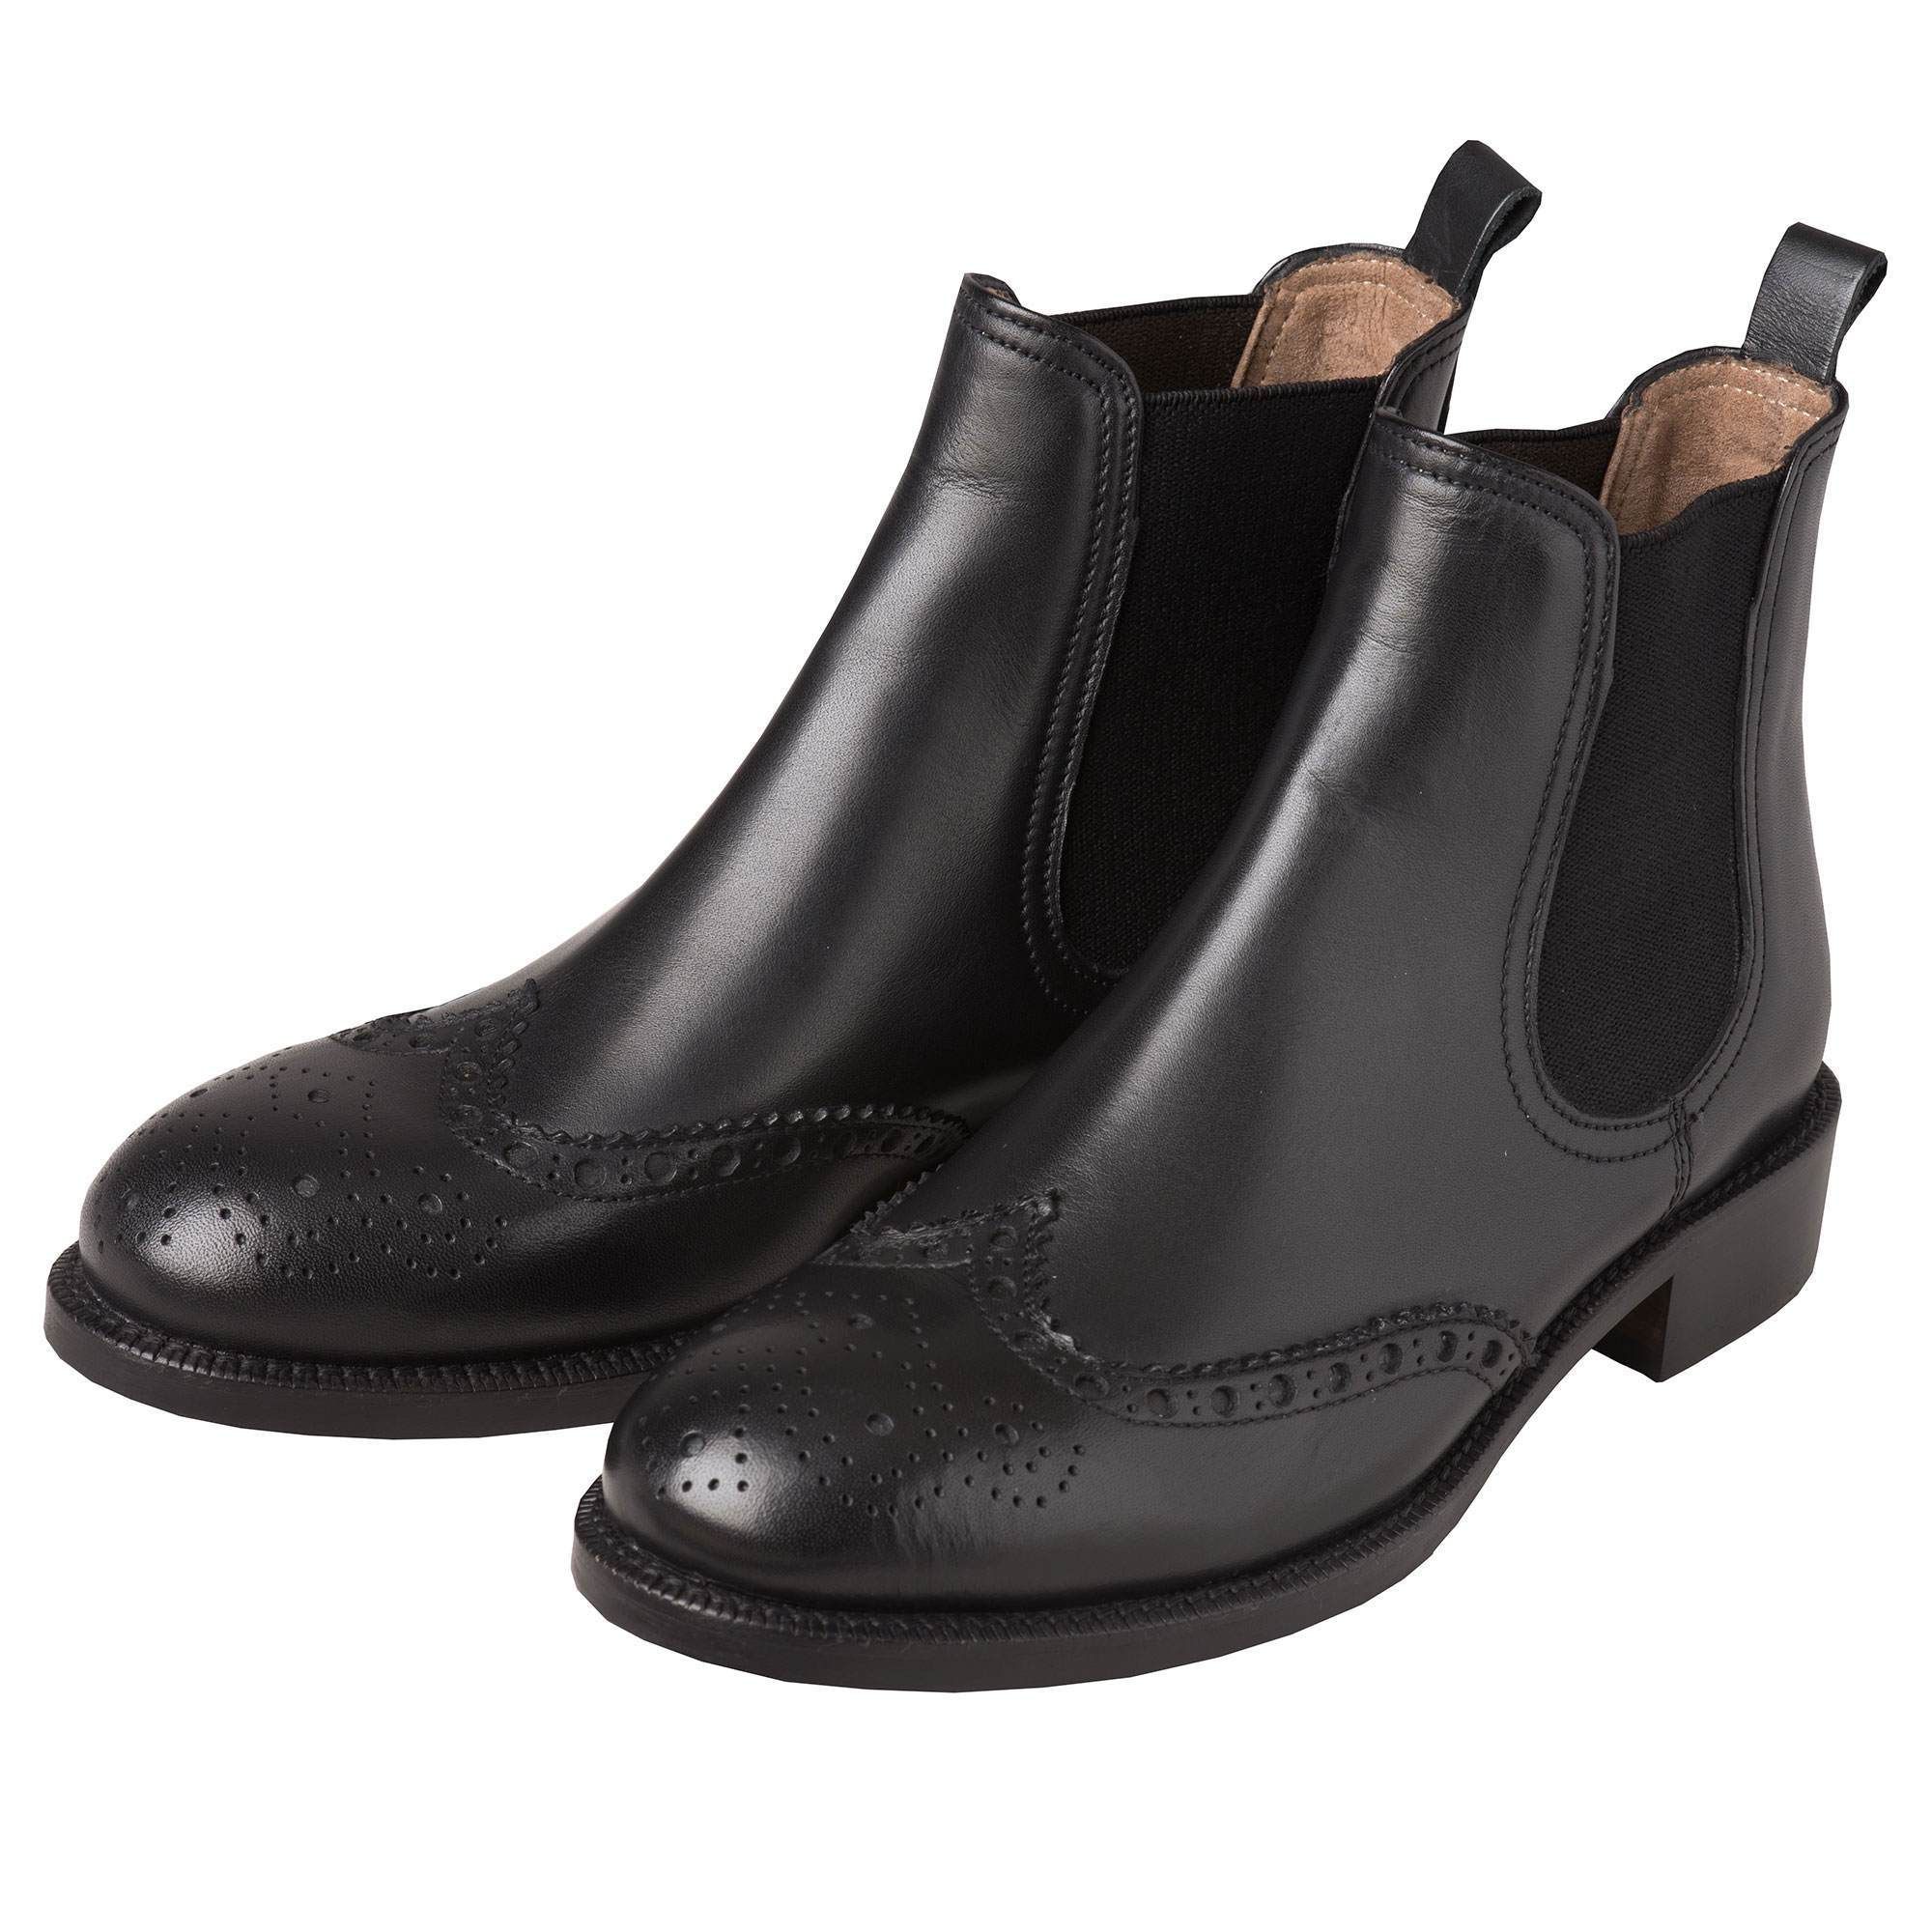 Black Leather Brogue Chelsea Boots | Ladies Country Clothing | Cordings